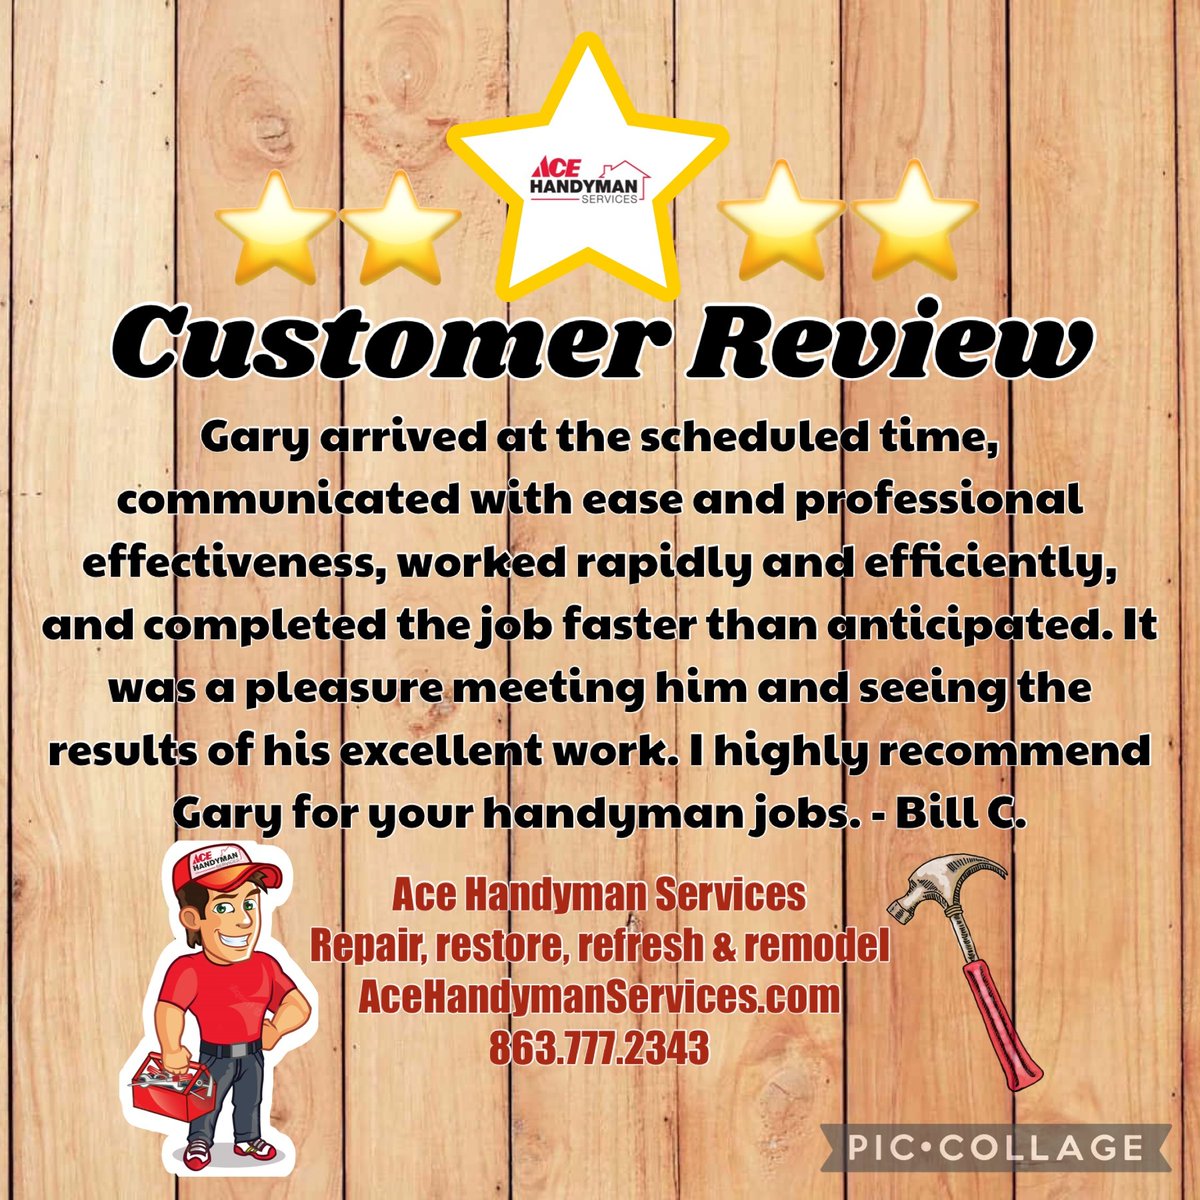 Five Star Friday! ⭐️
#AceHandymanServices #AHS #CentralFlorida #repairs #homeprojects #professionalservices #craftsman #fixit #rebuild #todolist #handyman #BringingHelpfulToYourHome #FiveStarReview #Friday